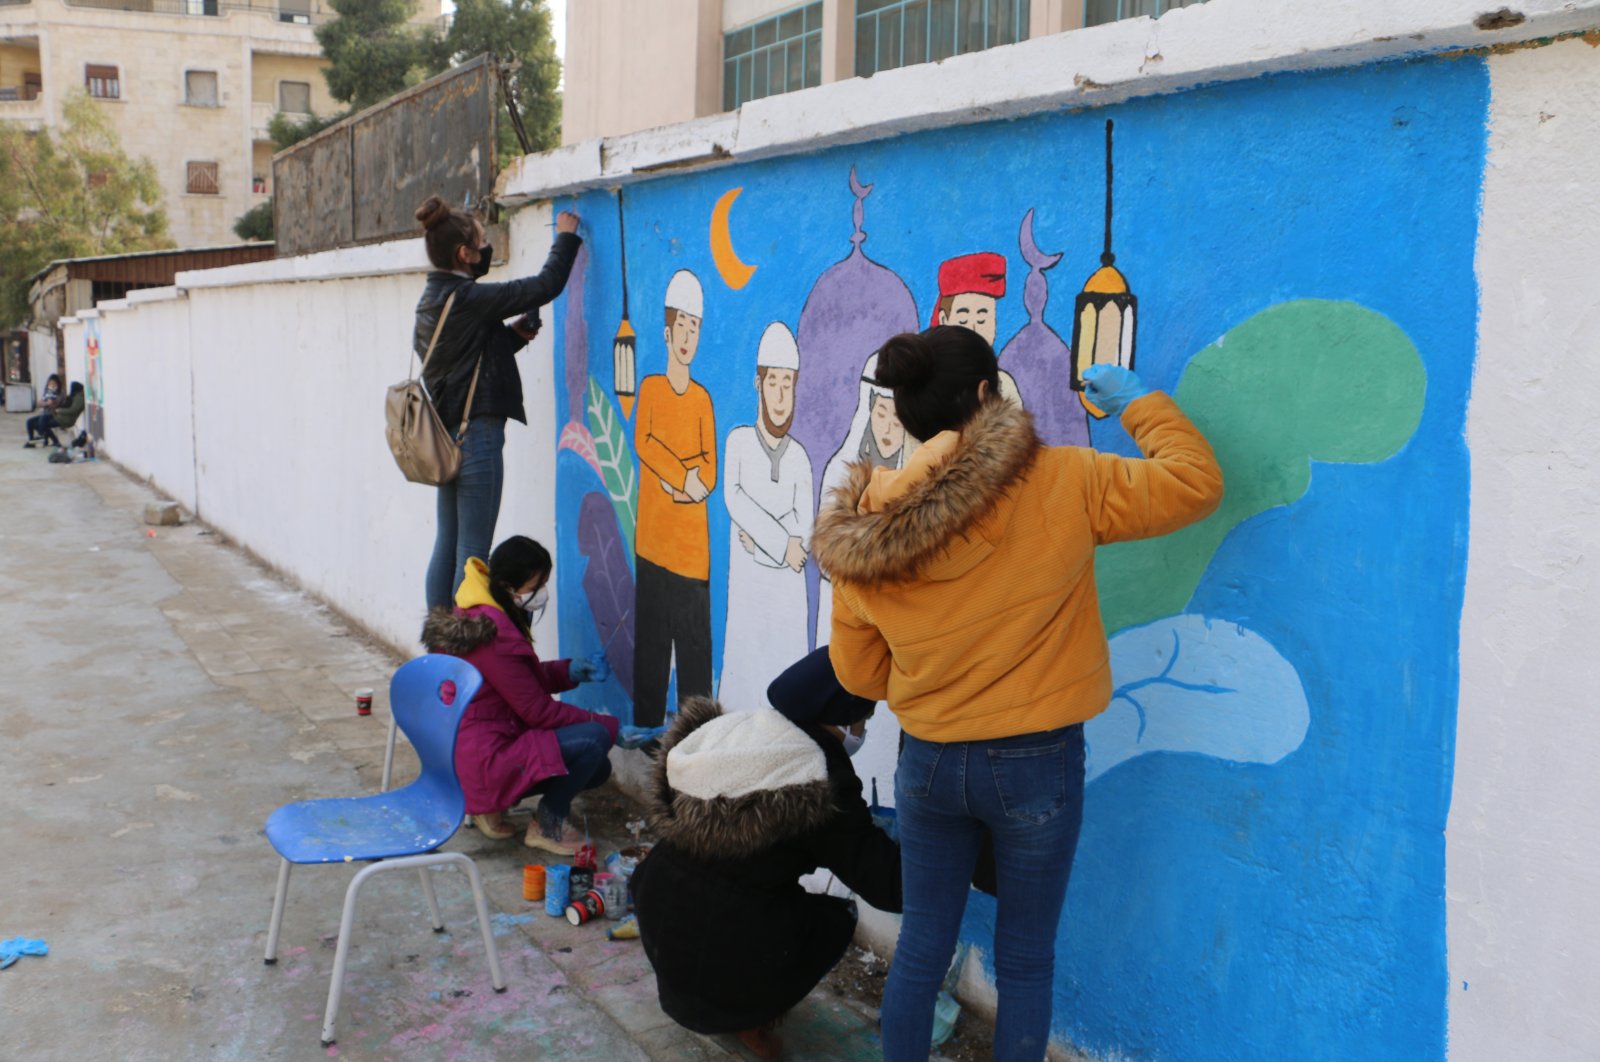 A group of young people decorates the walls of northern Syria's Afrin town with drawings, Feb. 10, 2021. (AA Photo)